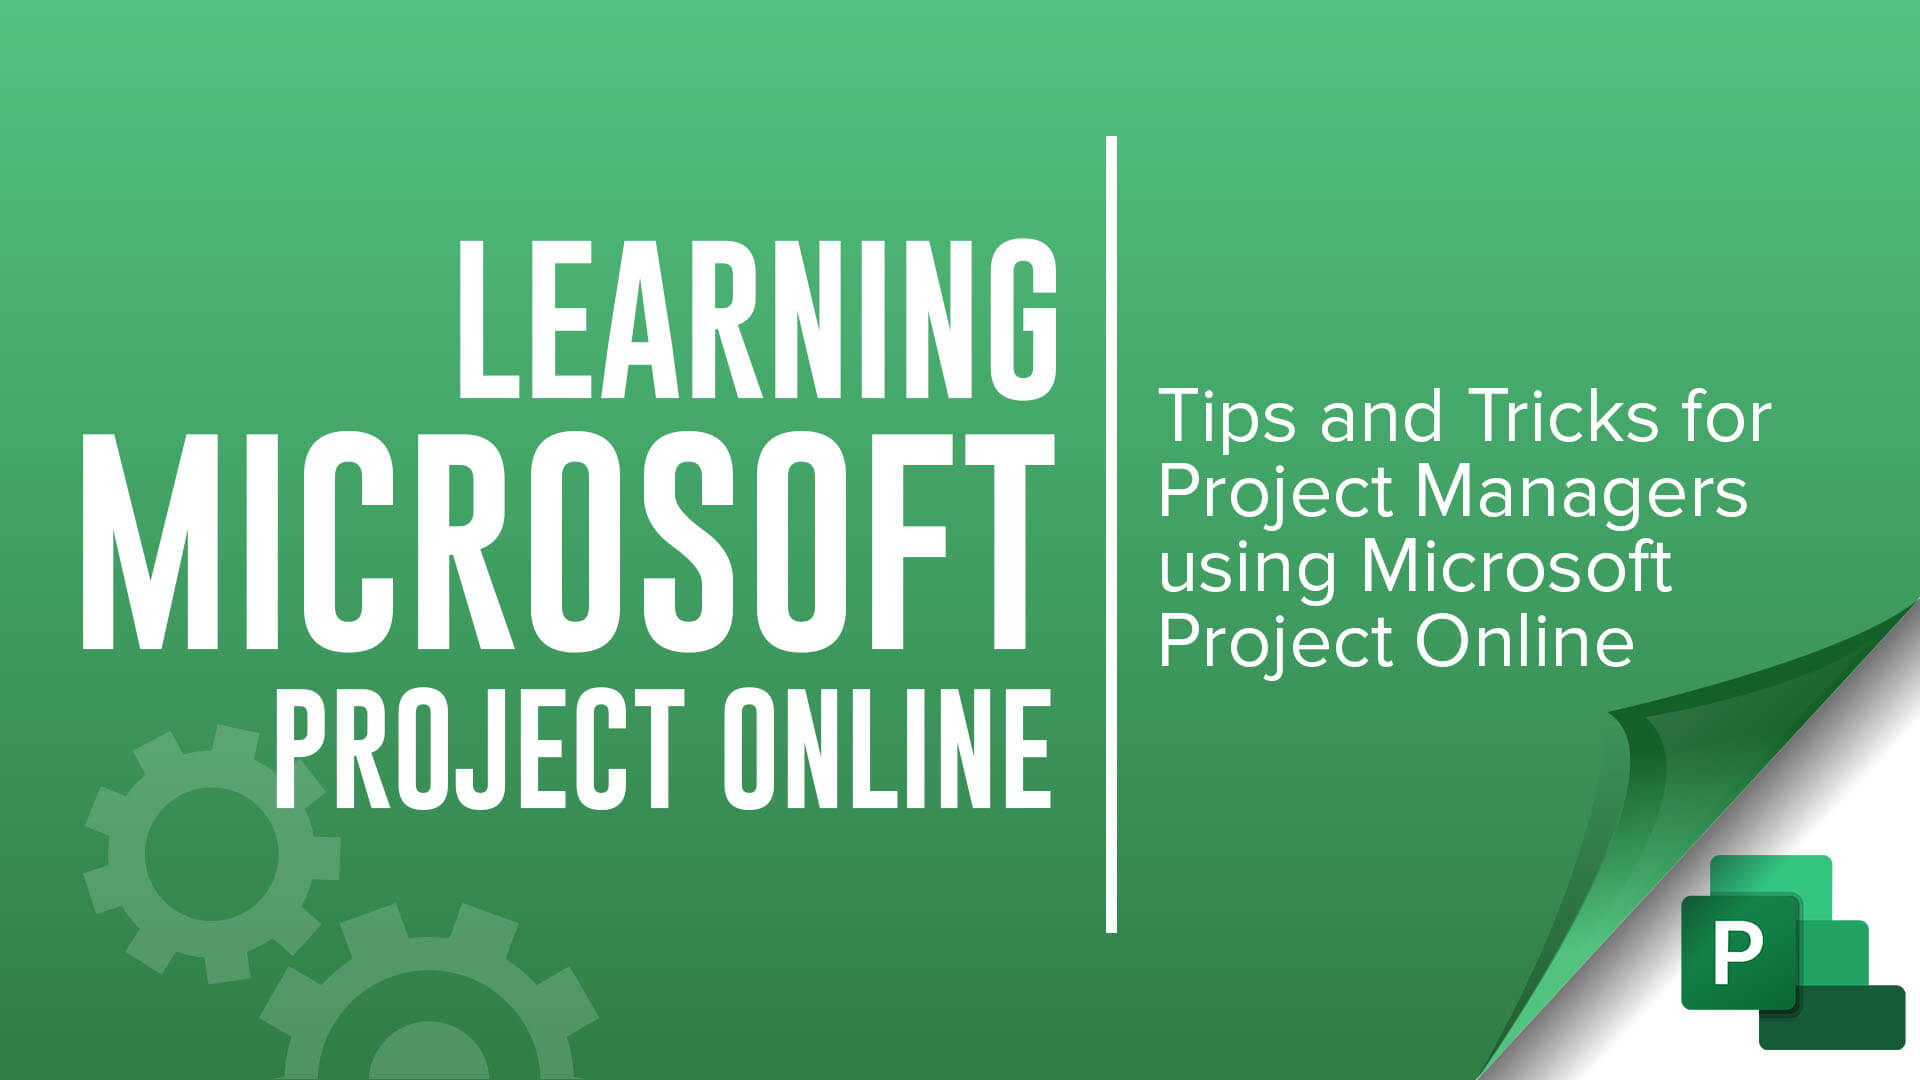 learning Microsoft Project Online - tips and tricks for project managers using Microsoft Project Online